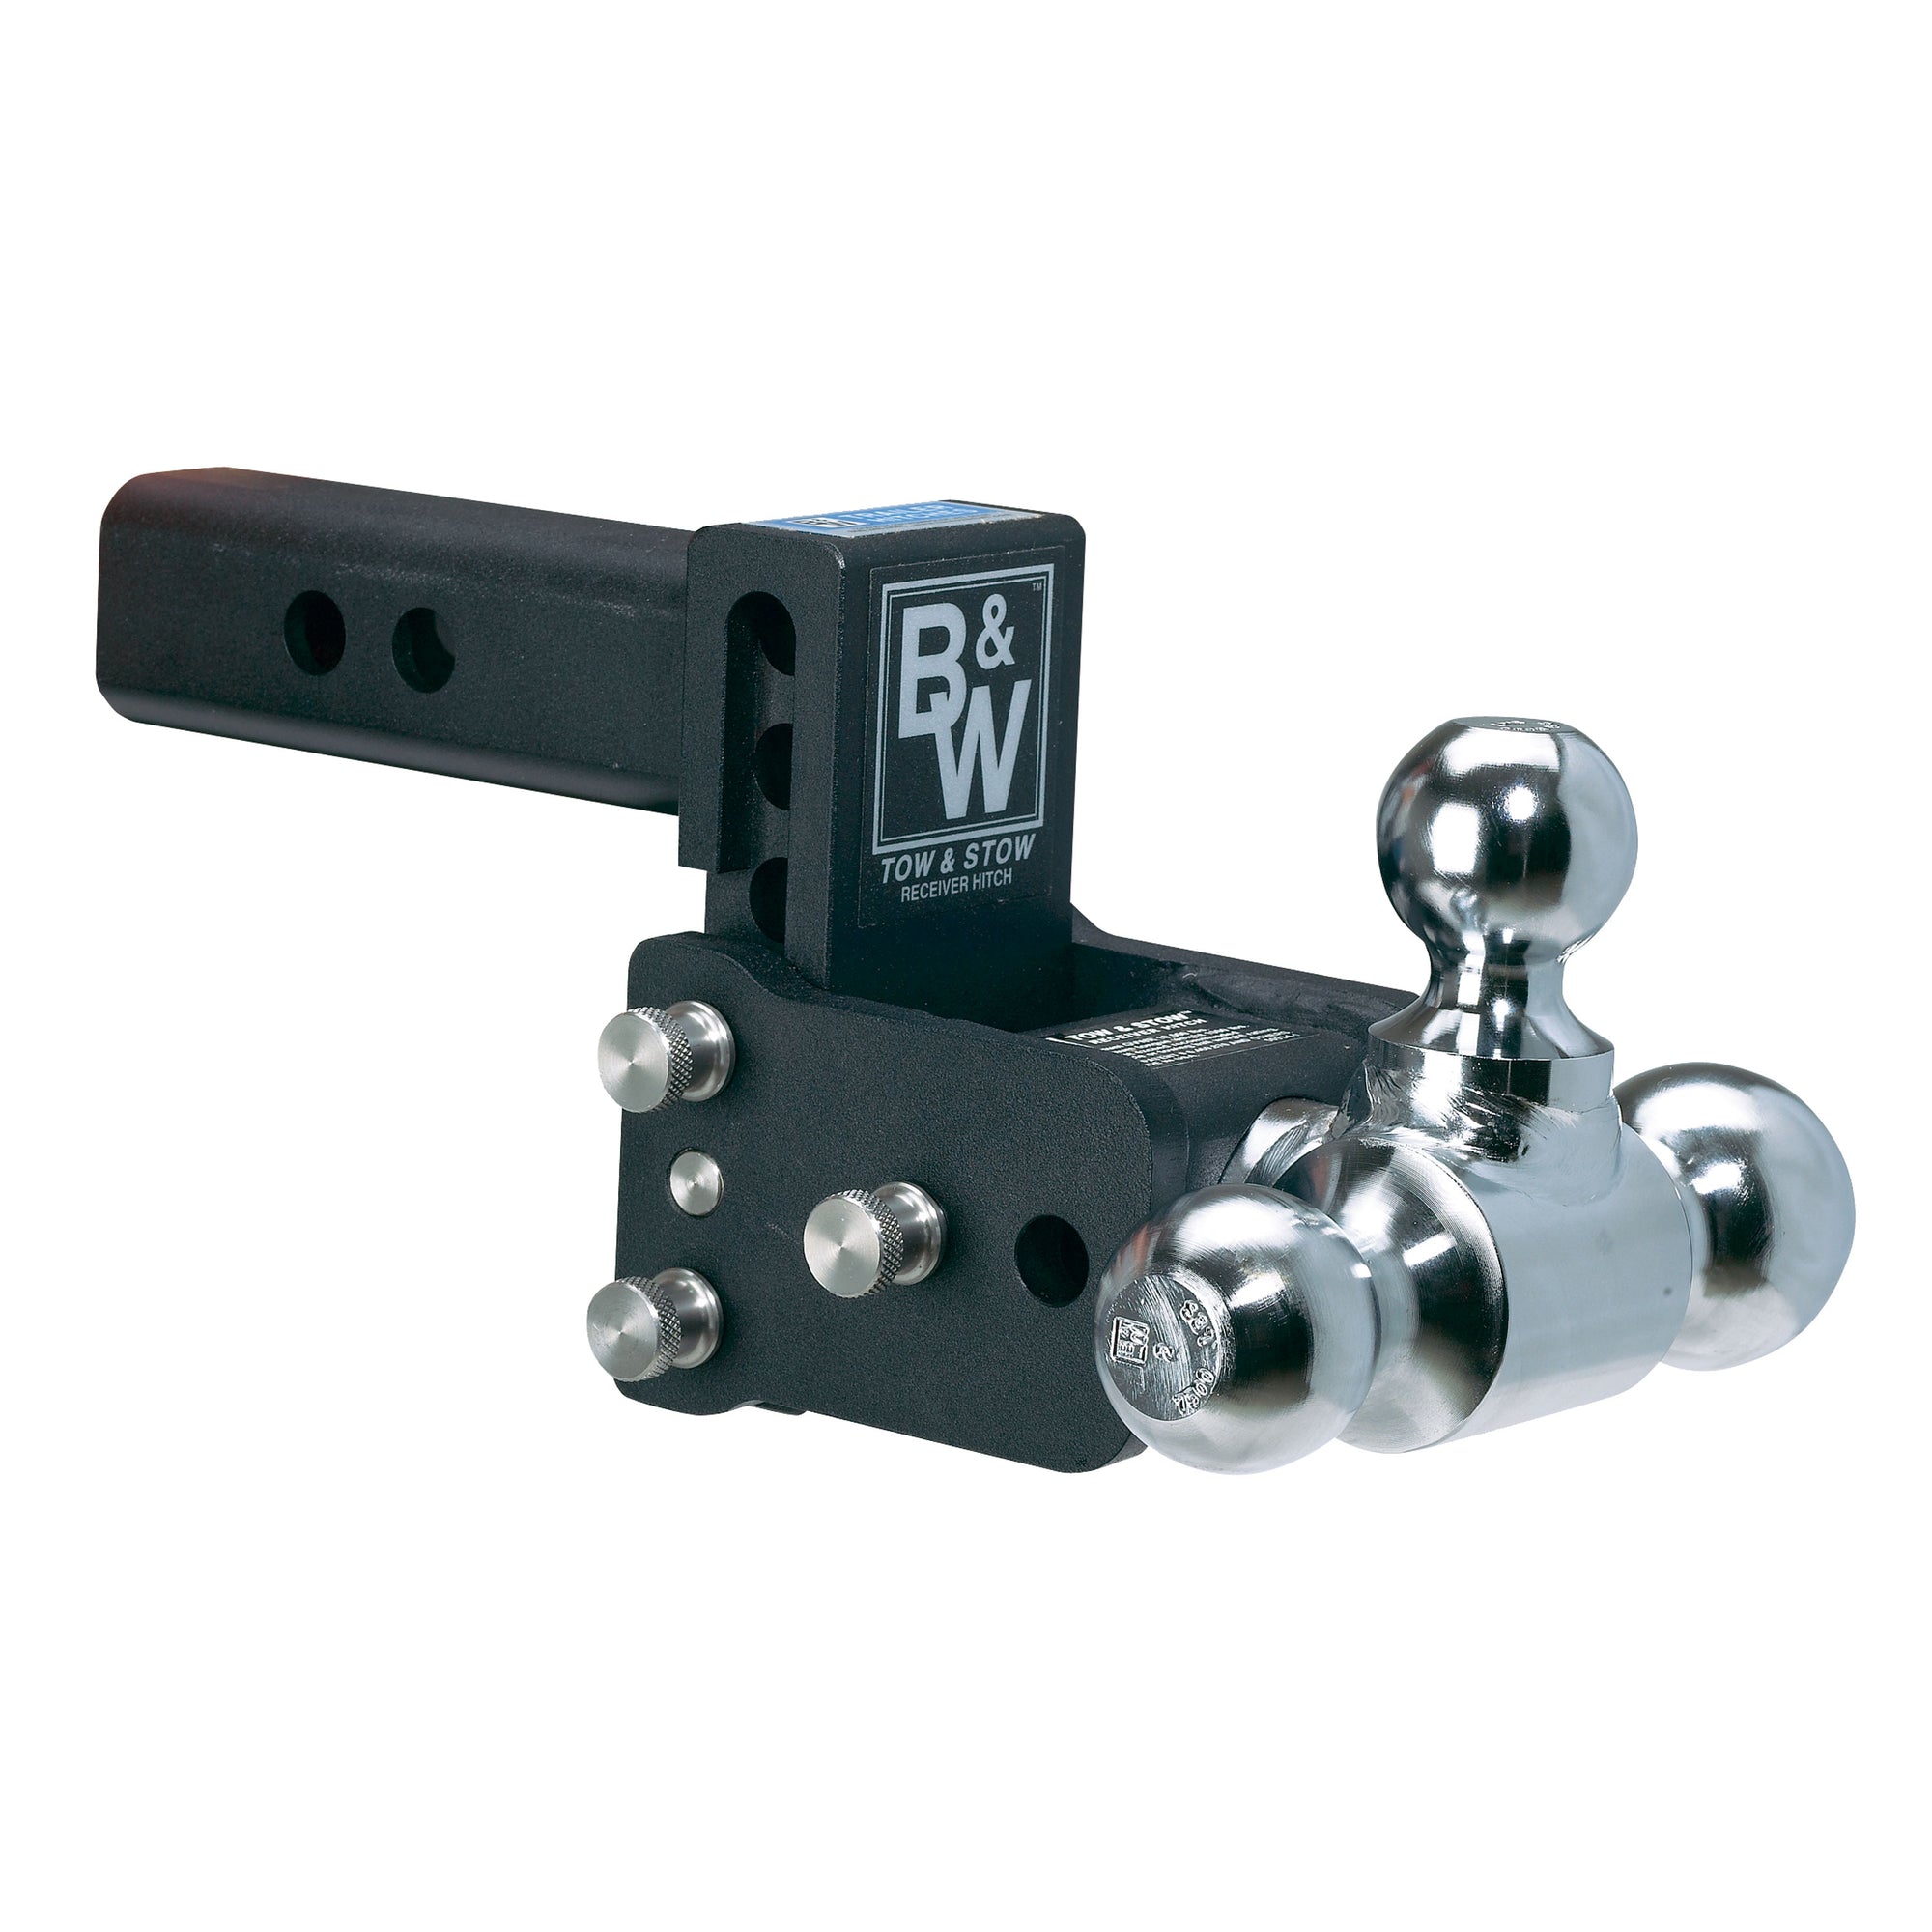 B&W Trailer Hitches TS10050B Tow and Stow Adjustable Ball Mount - 1-7/8", 2" & 2-5/16" Ball, 9" Drop, 9.5" Rise, Black